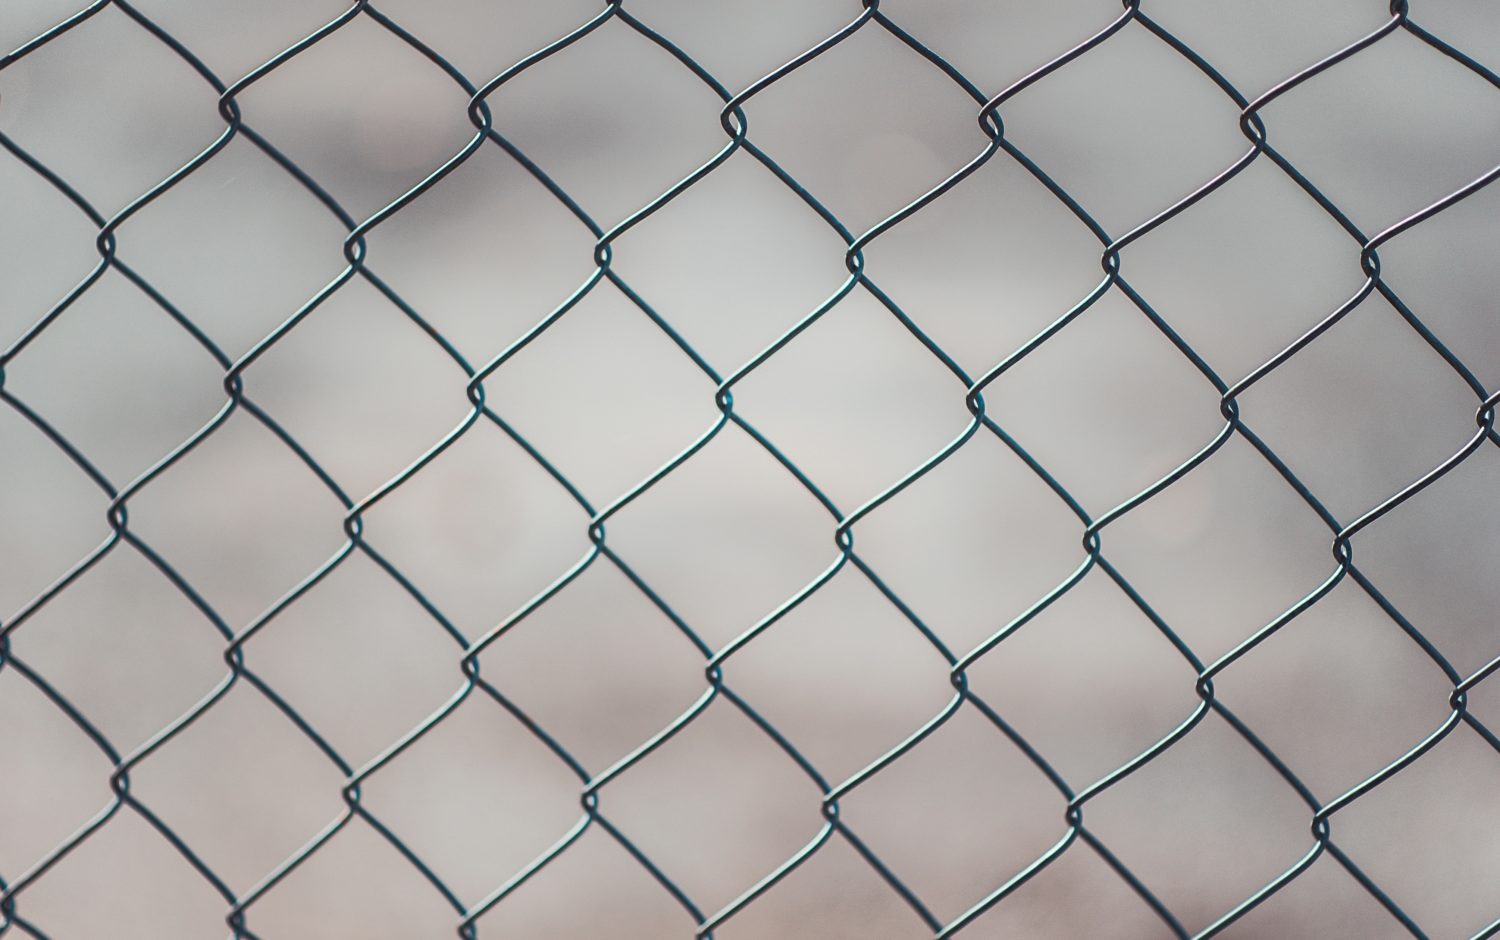 Close-up photo of a chain link fence